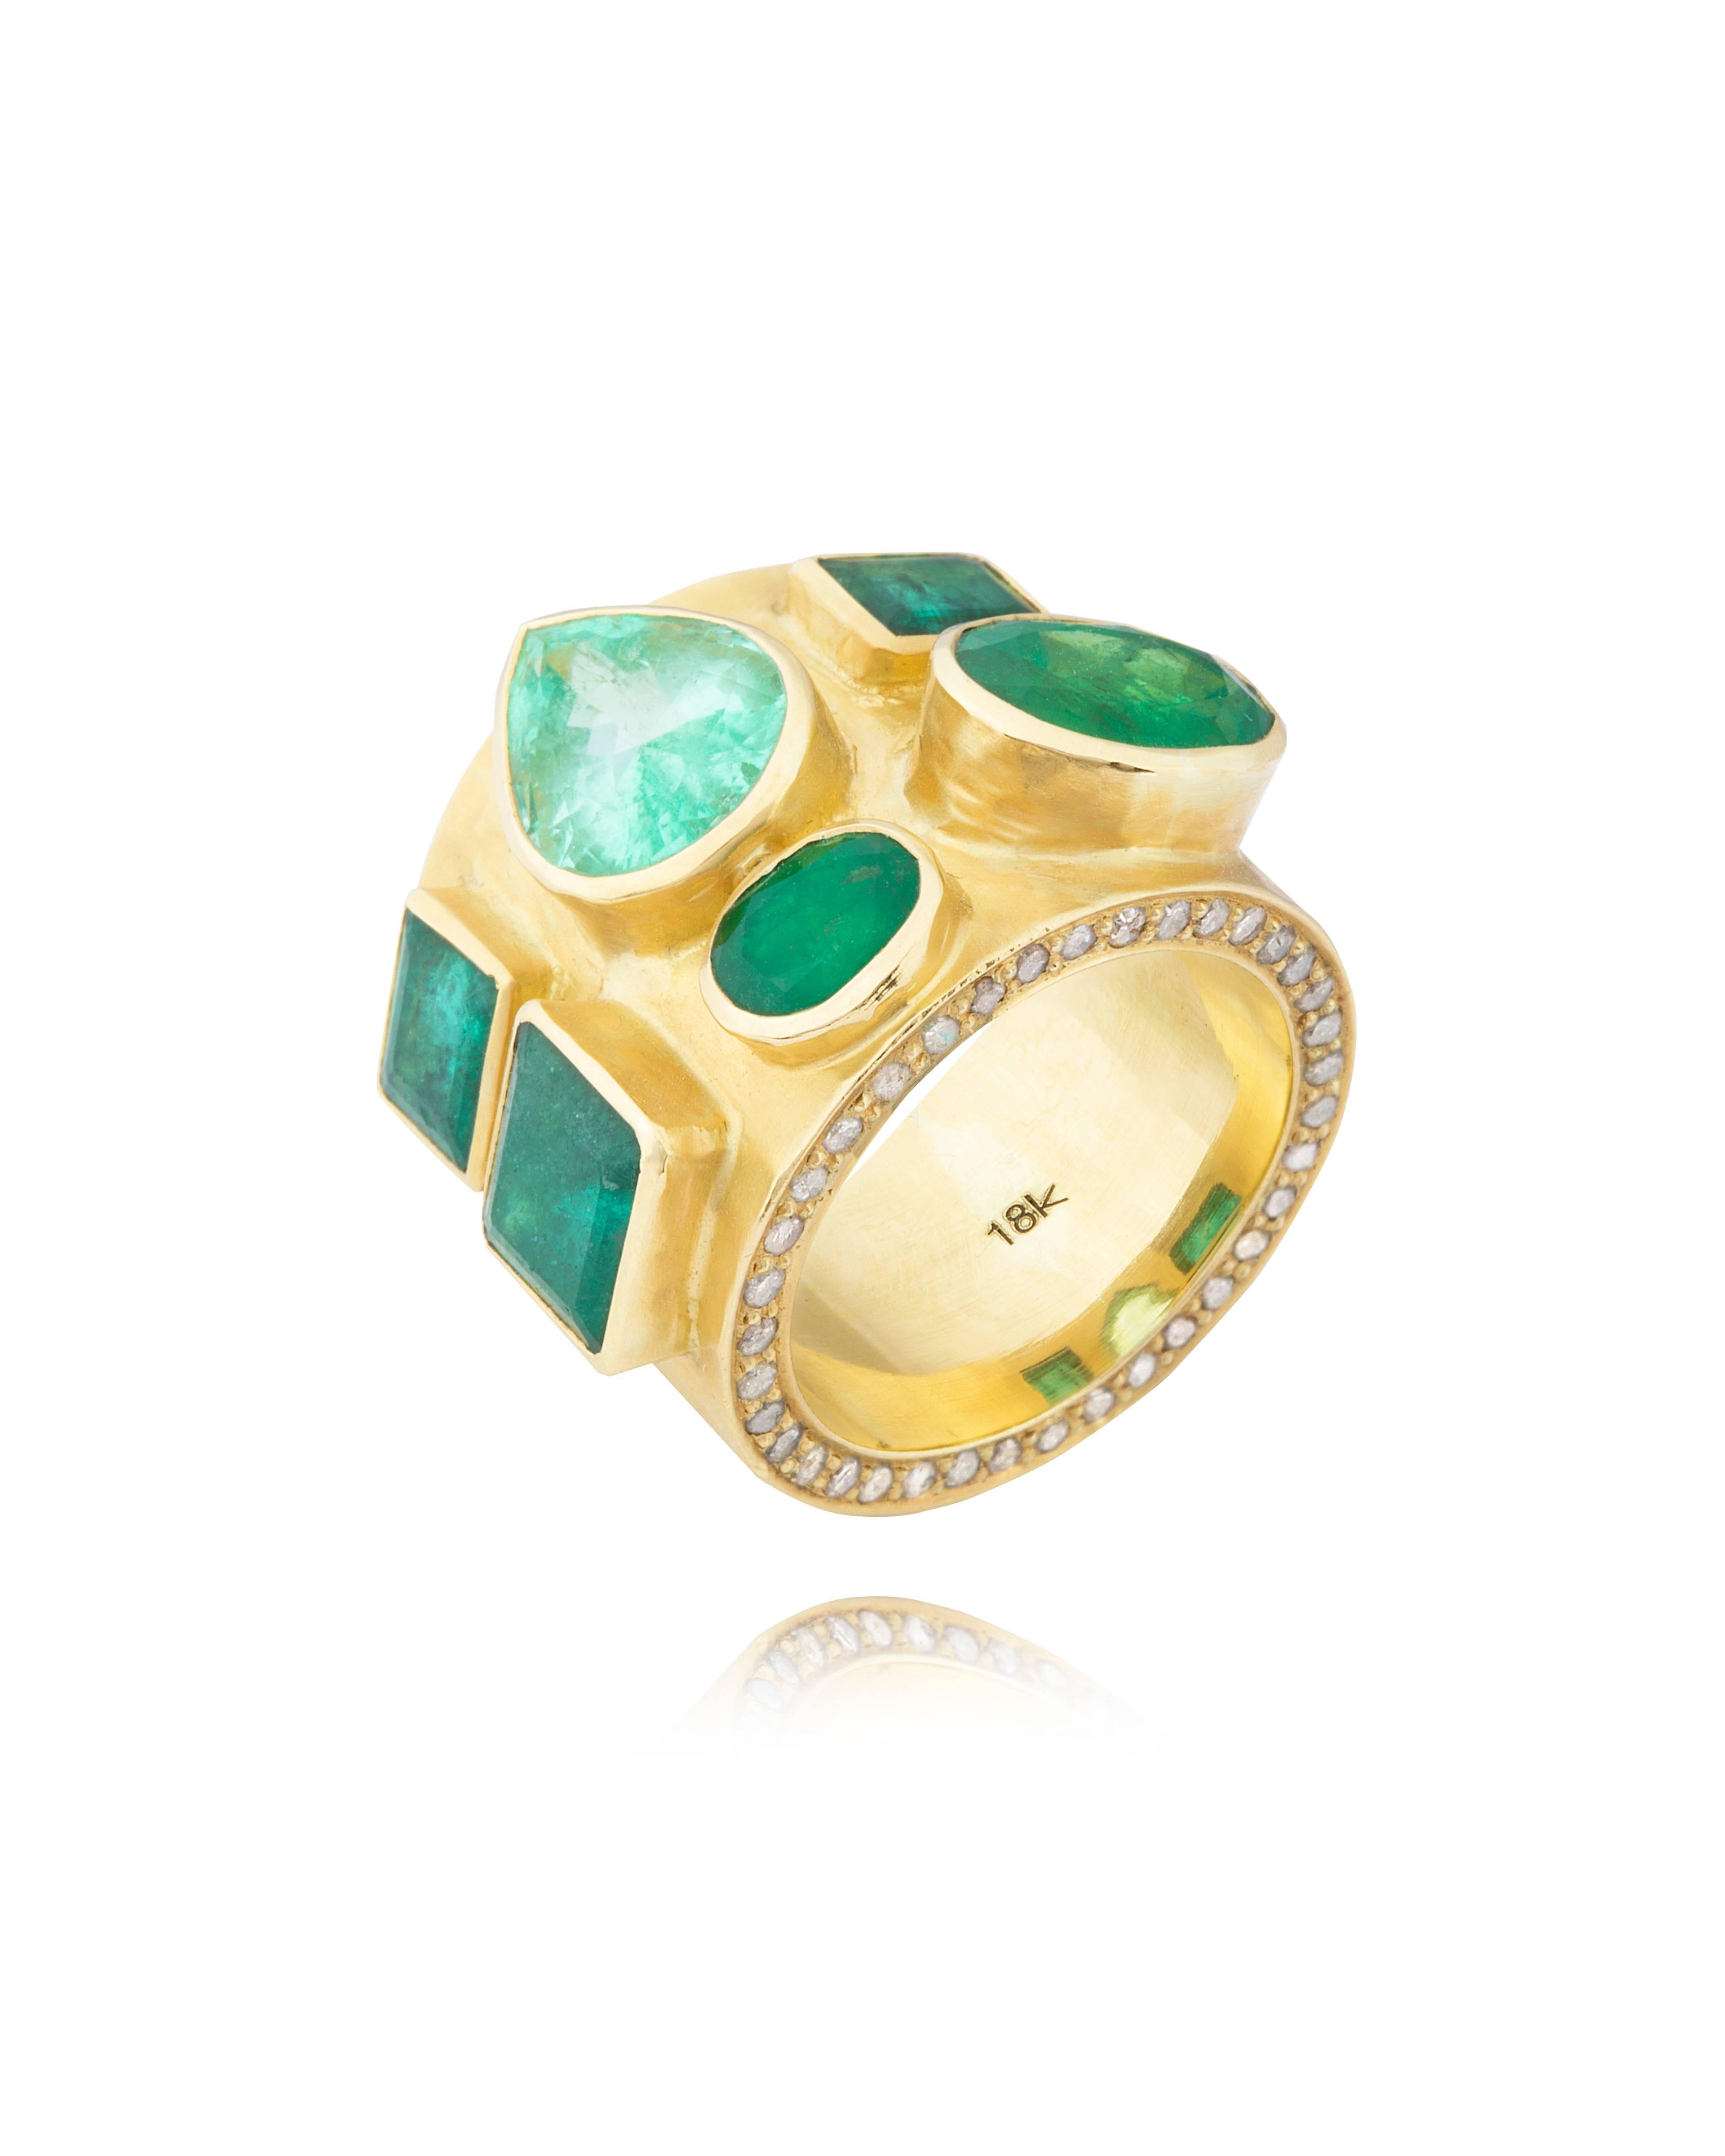 Mix of 6 Colombian and Zambian Emeralds on 18 karat hand beaten gold with circling diamonds on the outer edges of the ring.

This is a bespoke ring made on order. The Emerald Labyrinth Ring normally takes around 8 weeks to ship from date of order.